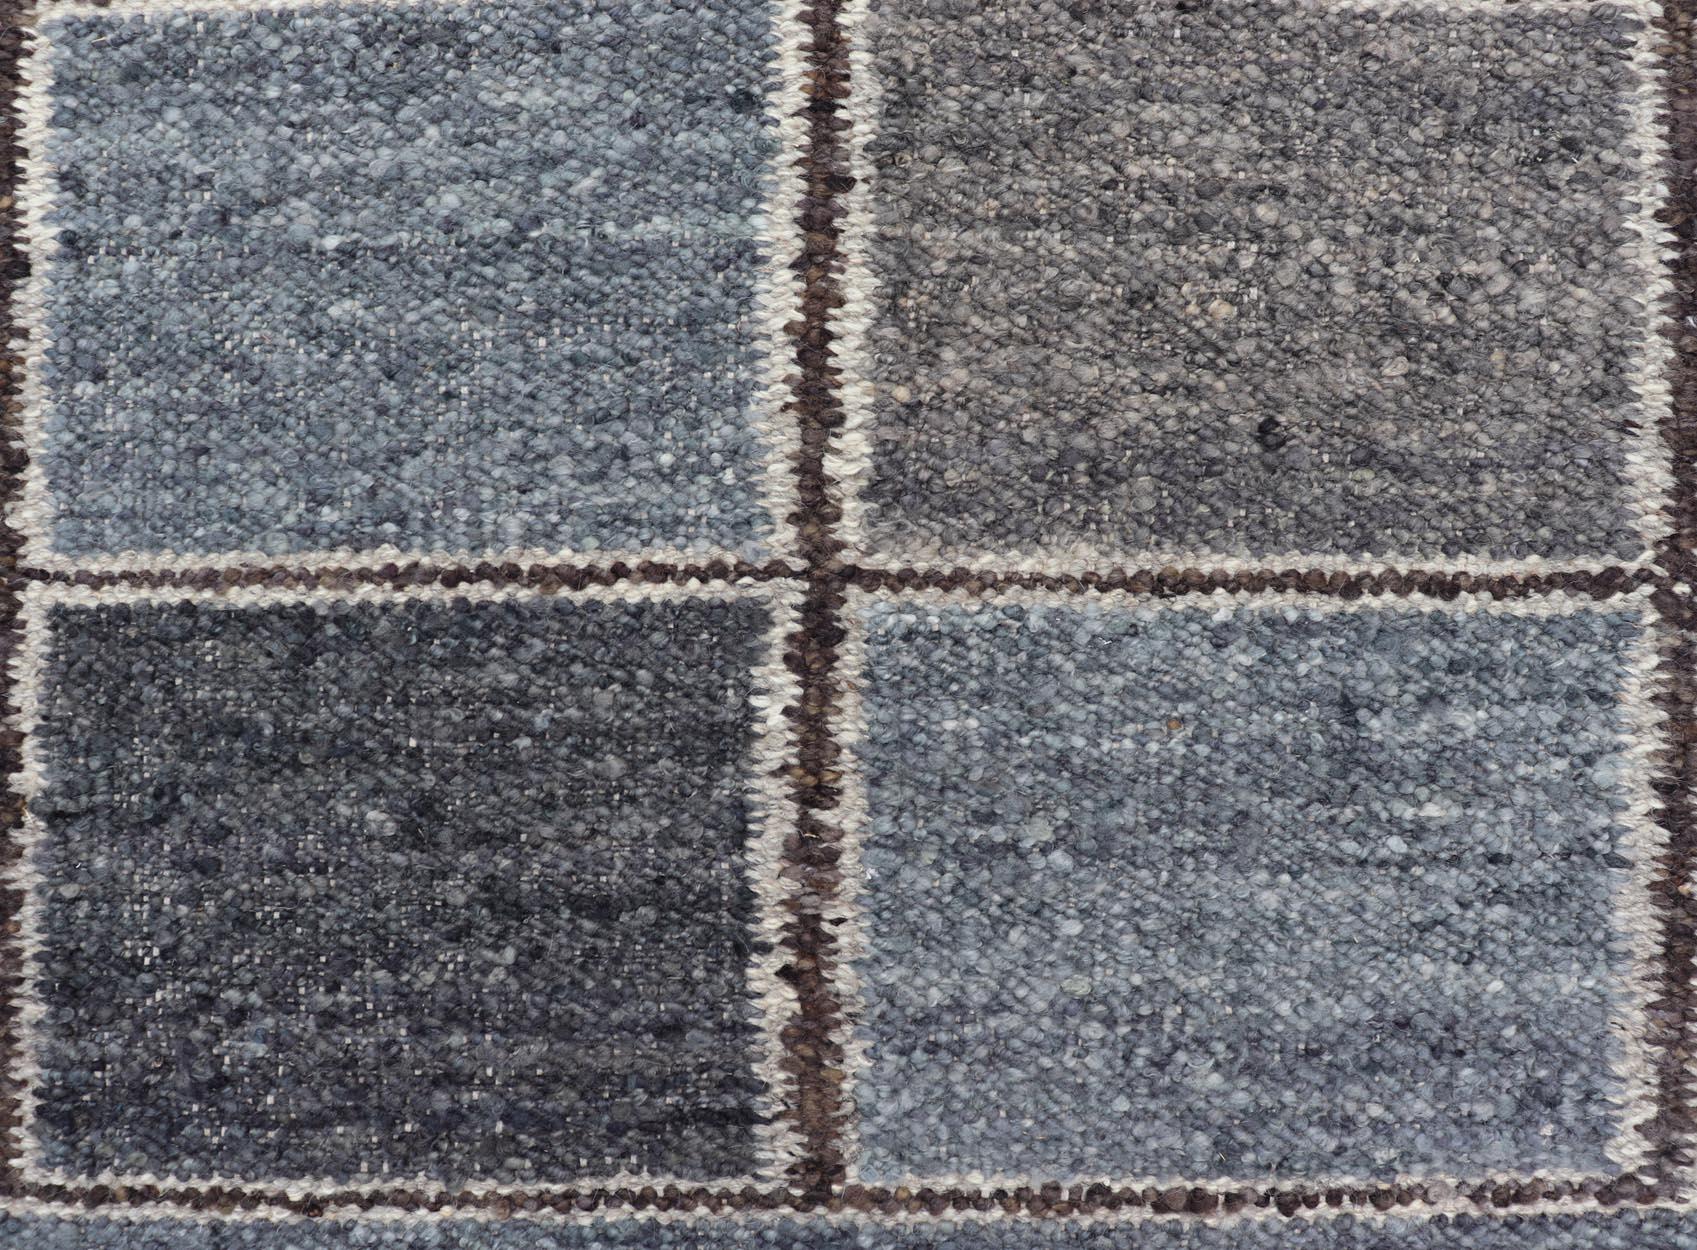 Contemporary Modern Scandinavian/Swedish Design Rug in Blue, Charcoal, Gray and Cream For Sale